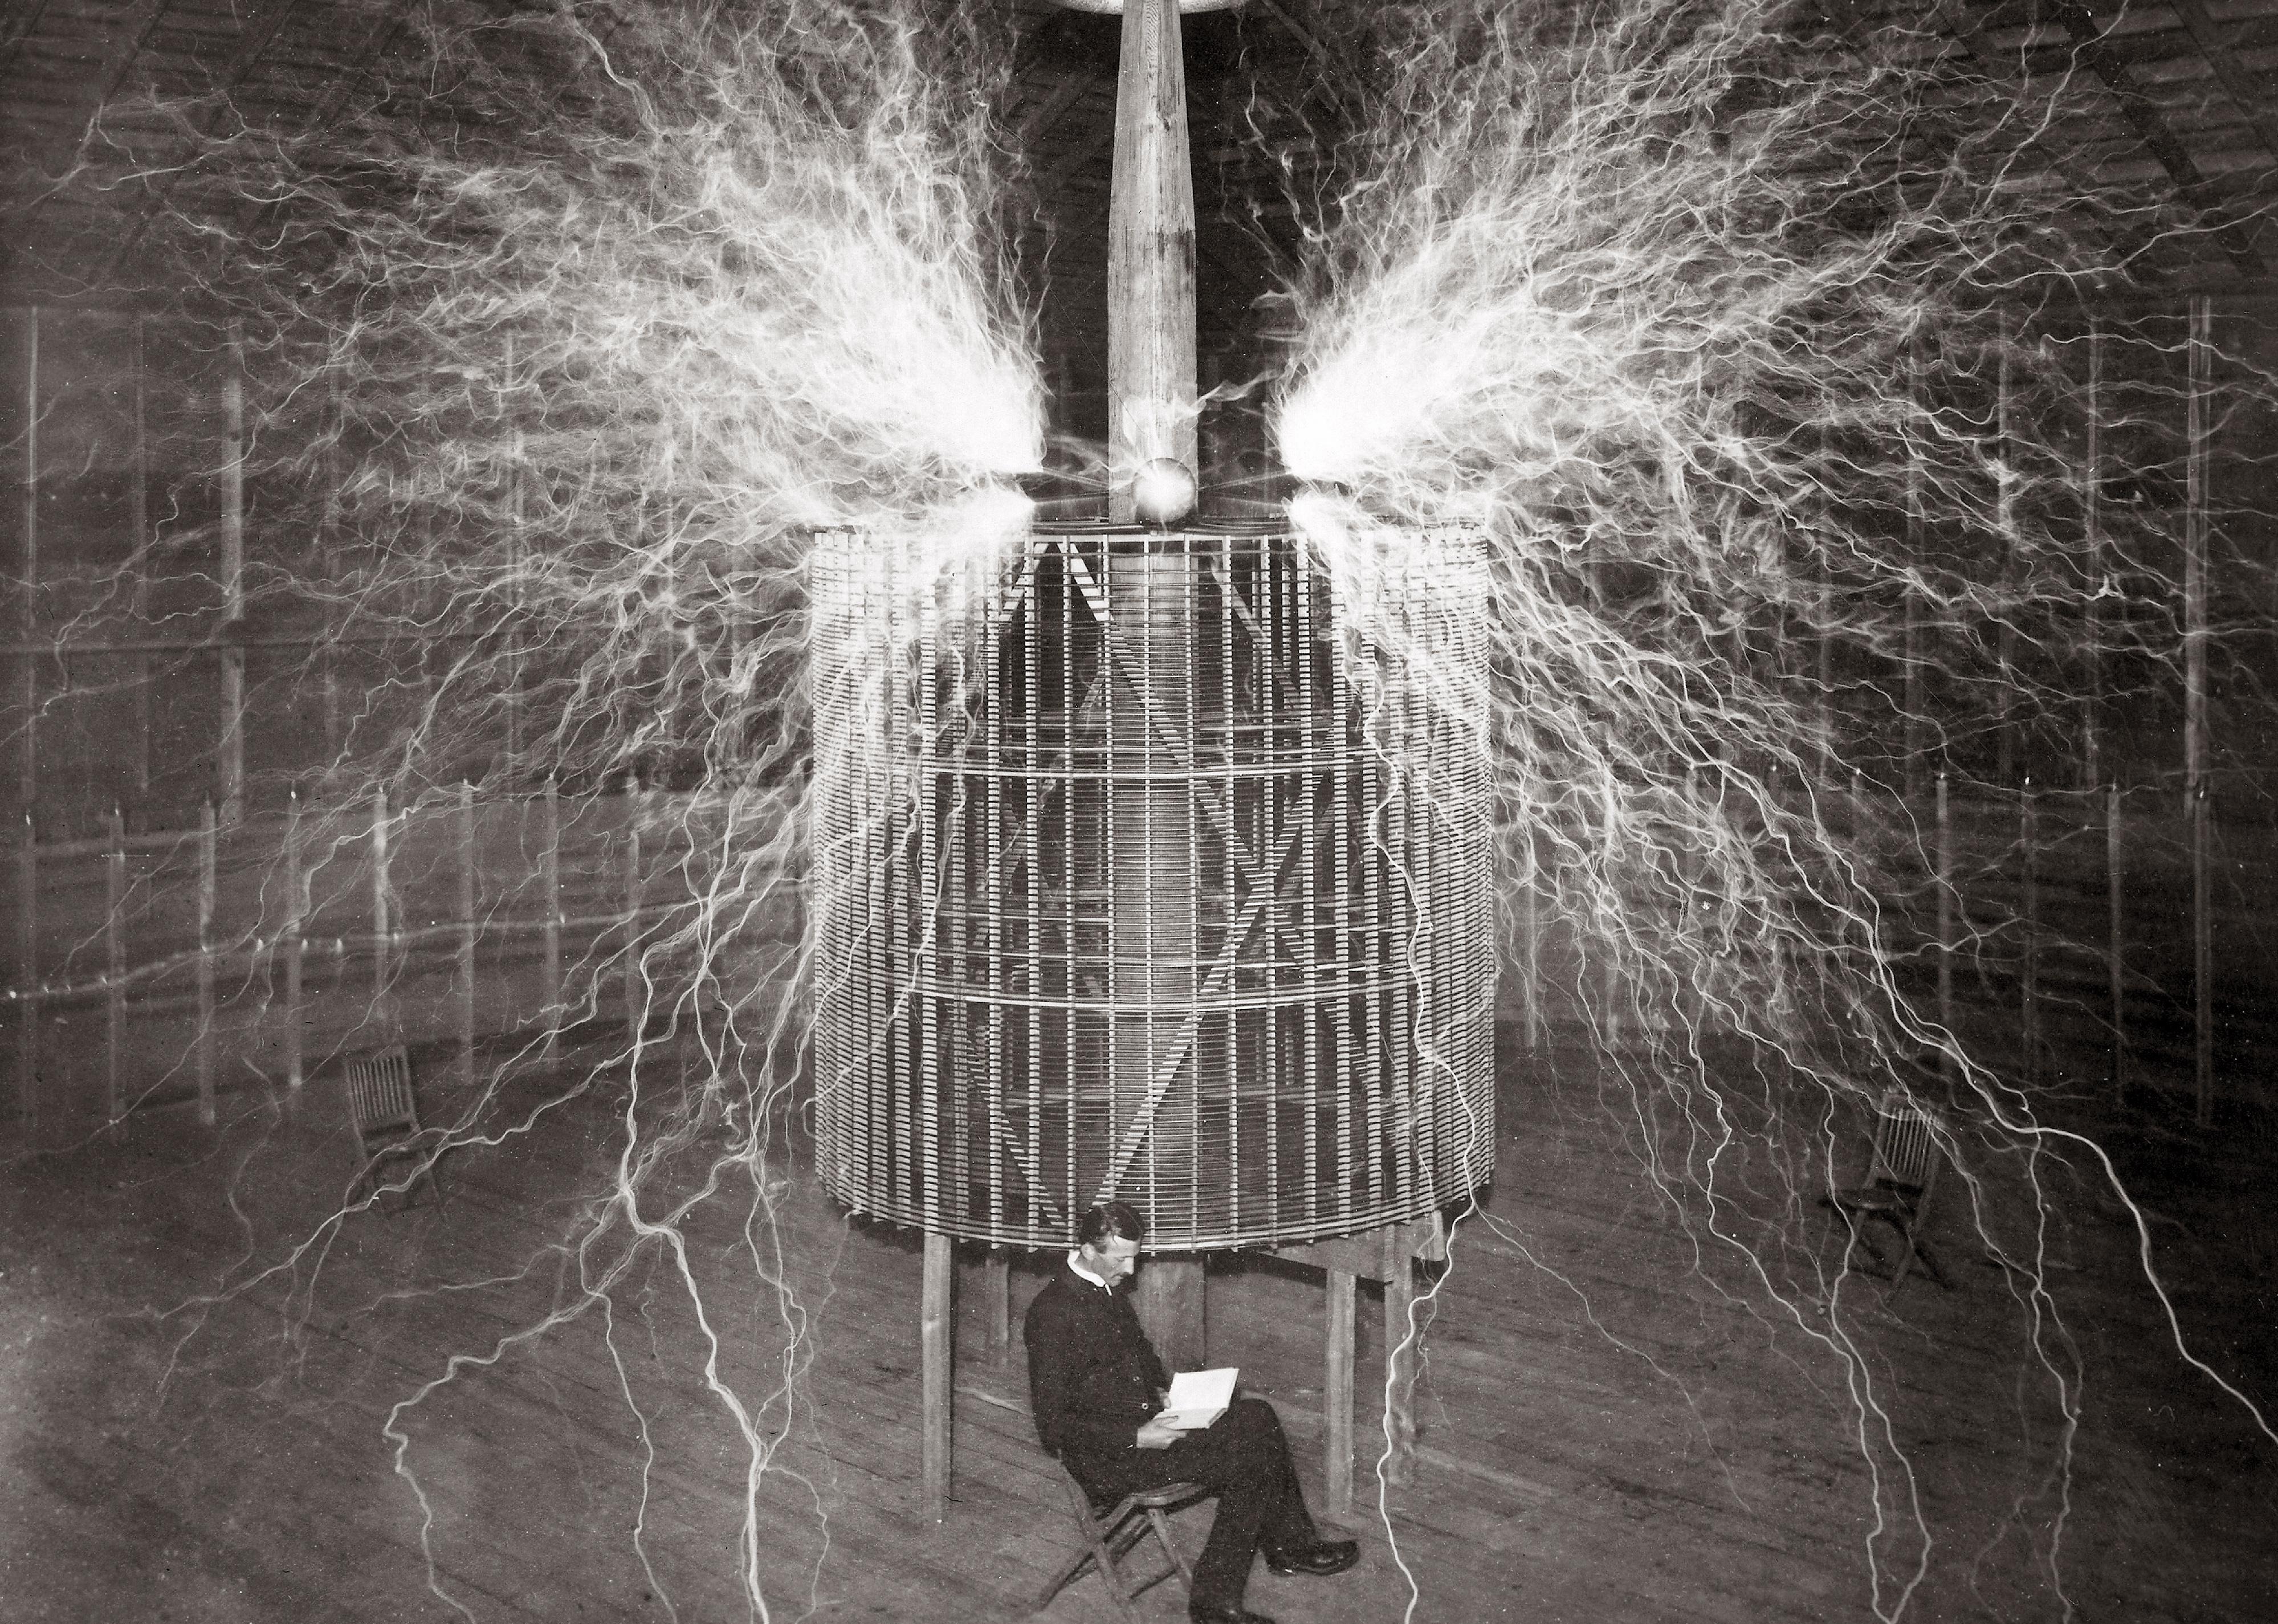 Nikola Tesla sitting in a chair in his lab in front of a contraption shooting electricity from all sides.